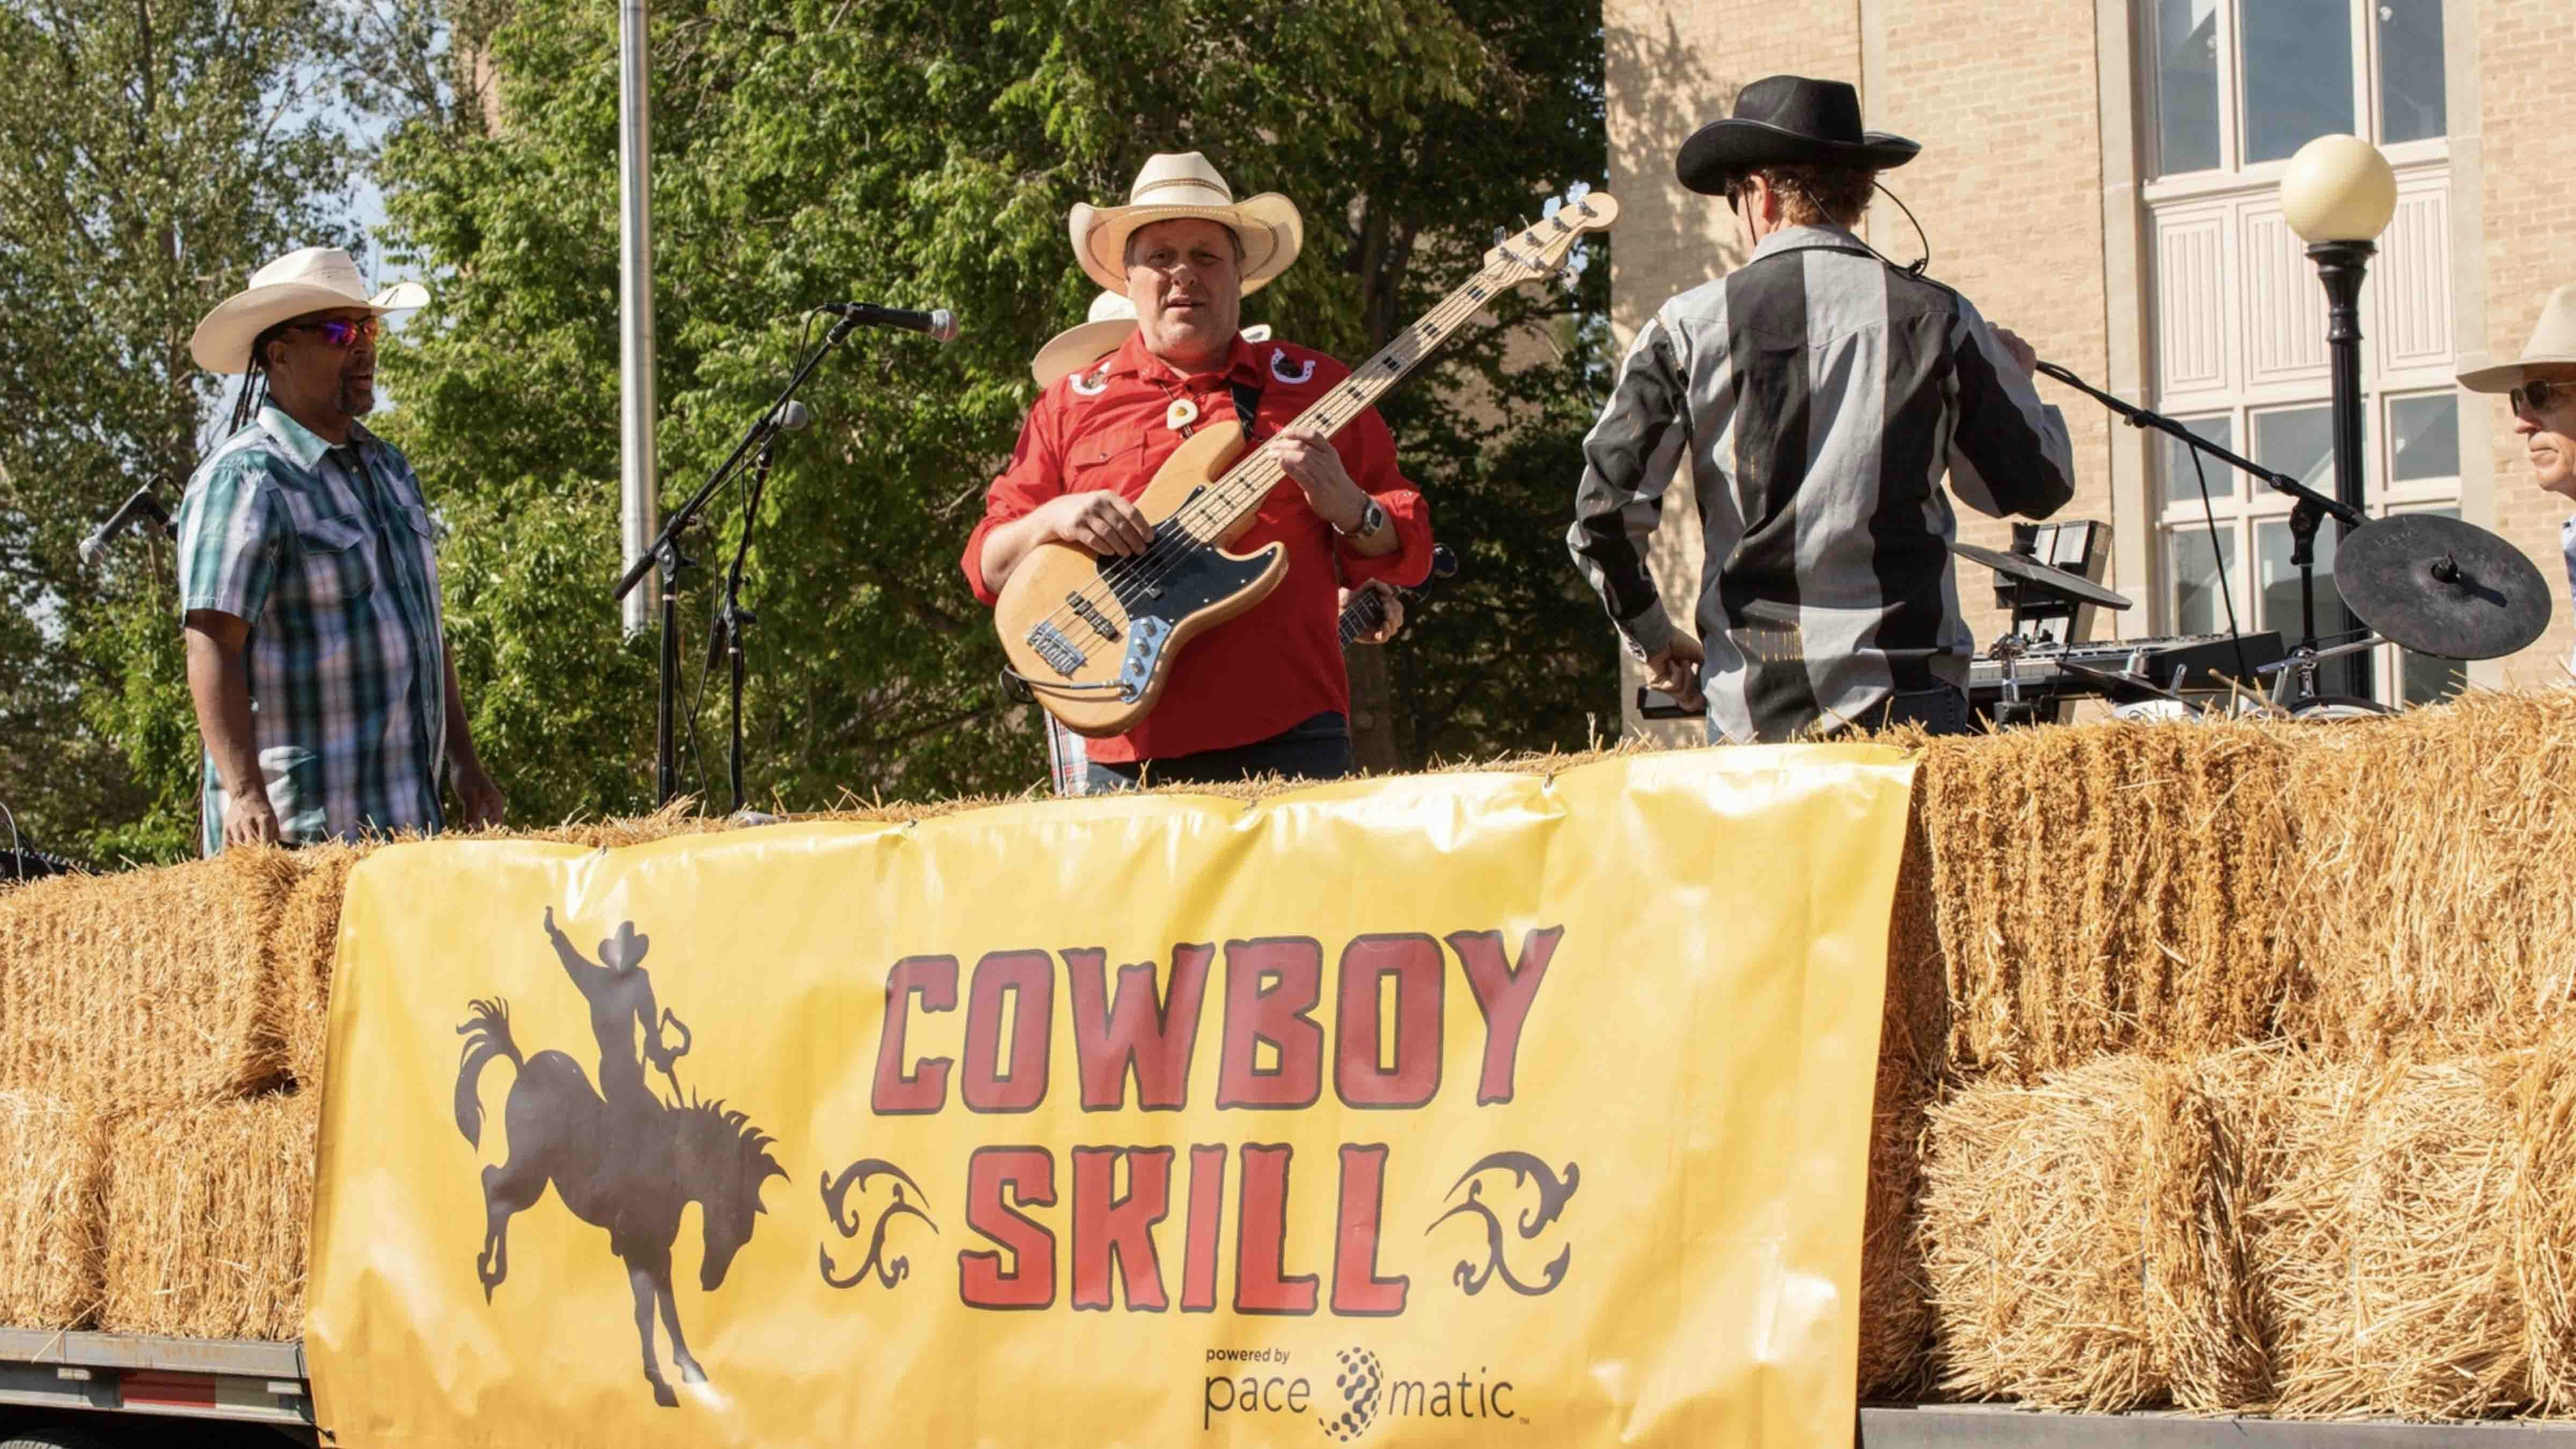 Every year, The Nacho Men band plays in the Cowboy Skill float during the CFD parade.